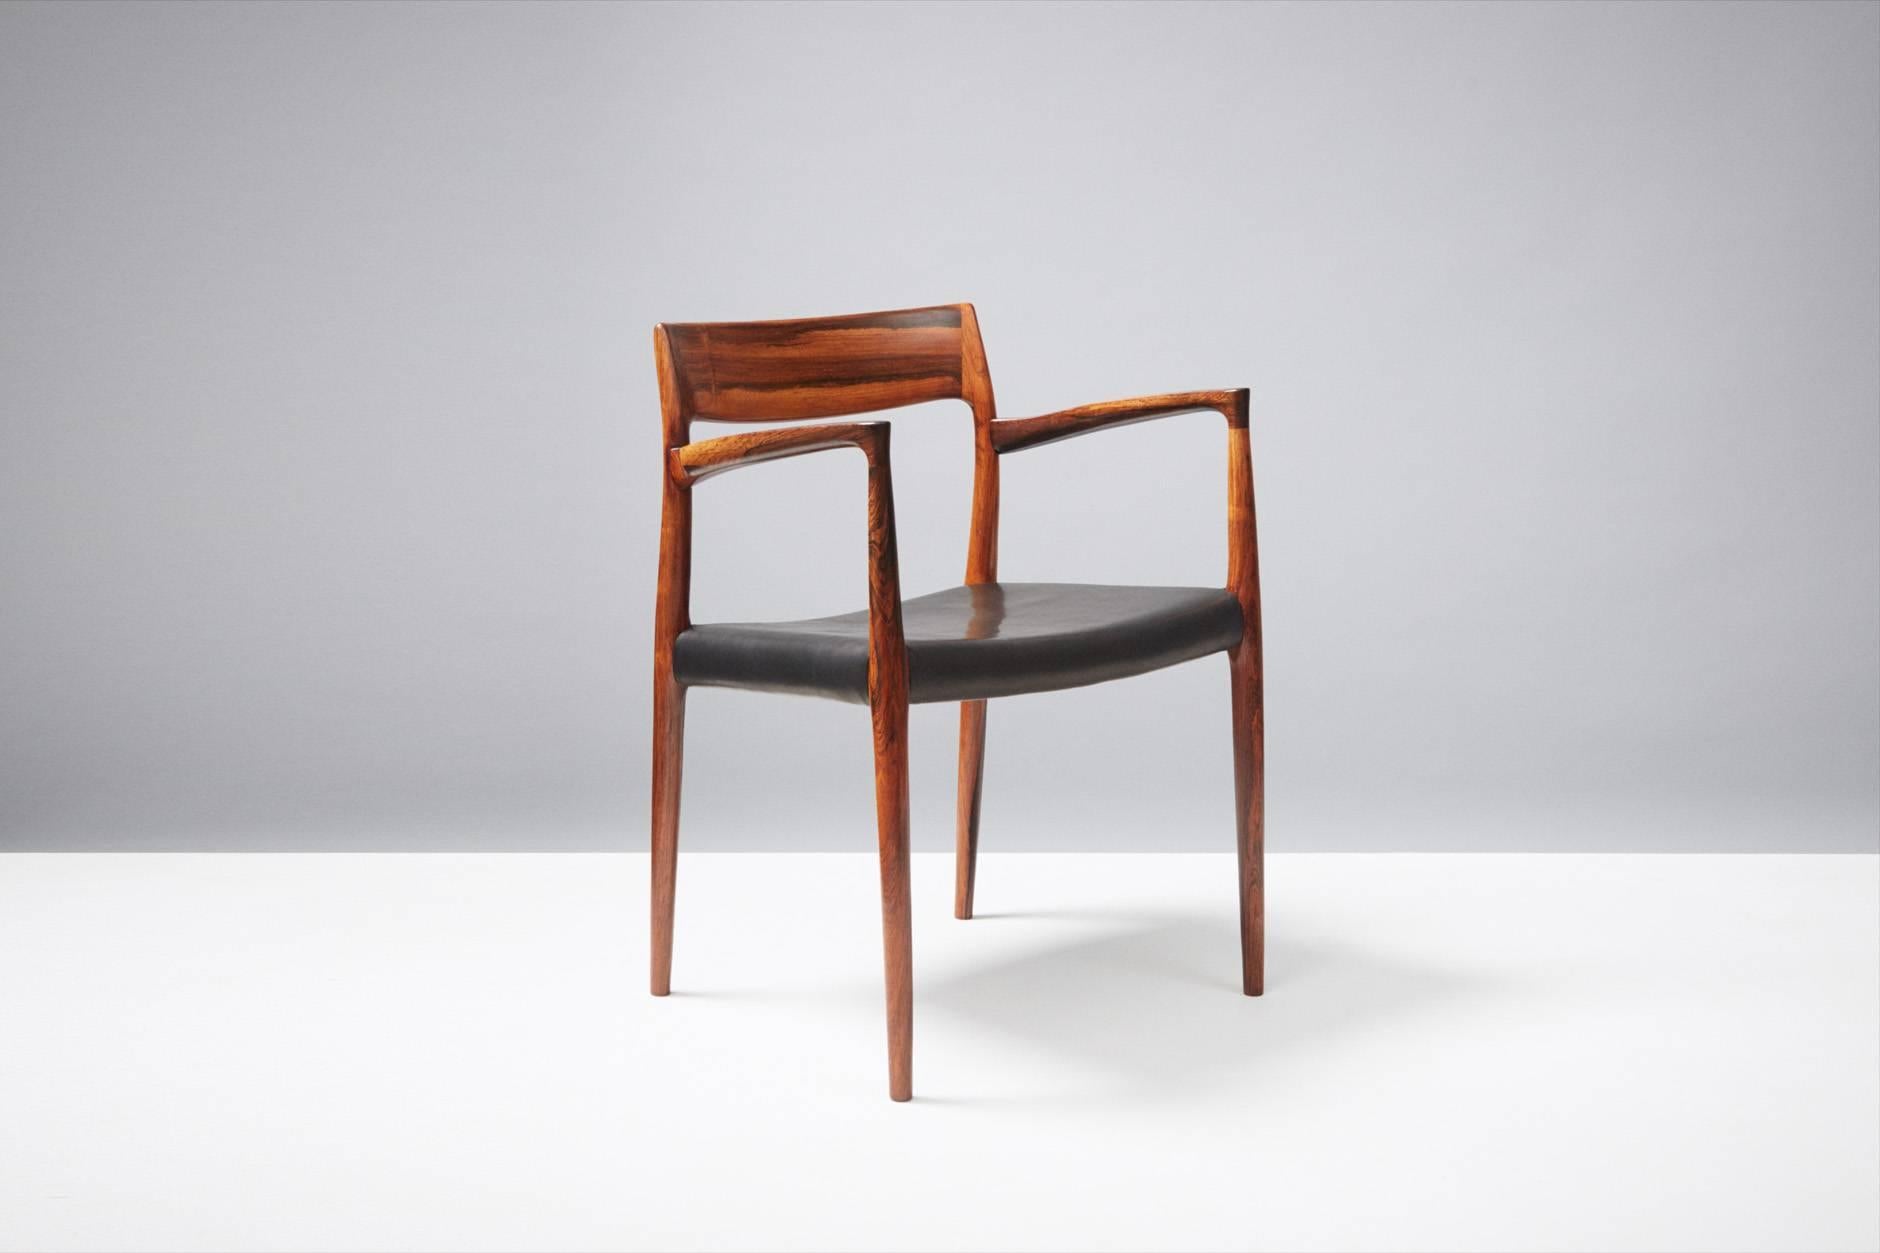 Rarely seen example in Brazilian rosewood, produced by J.L. Moller Mobelfabrik, Denmark, 1959. Seat reupholstered with black aniline leather.